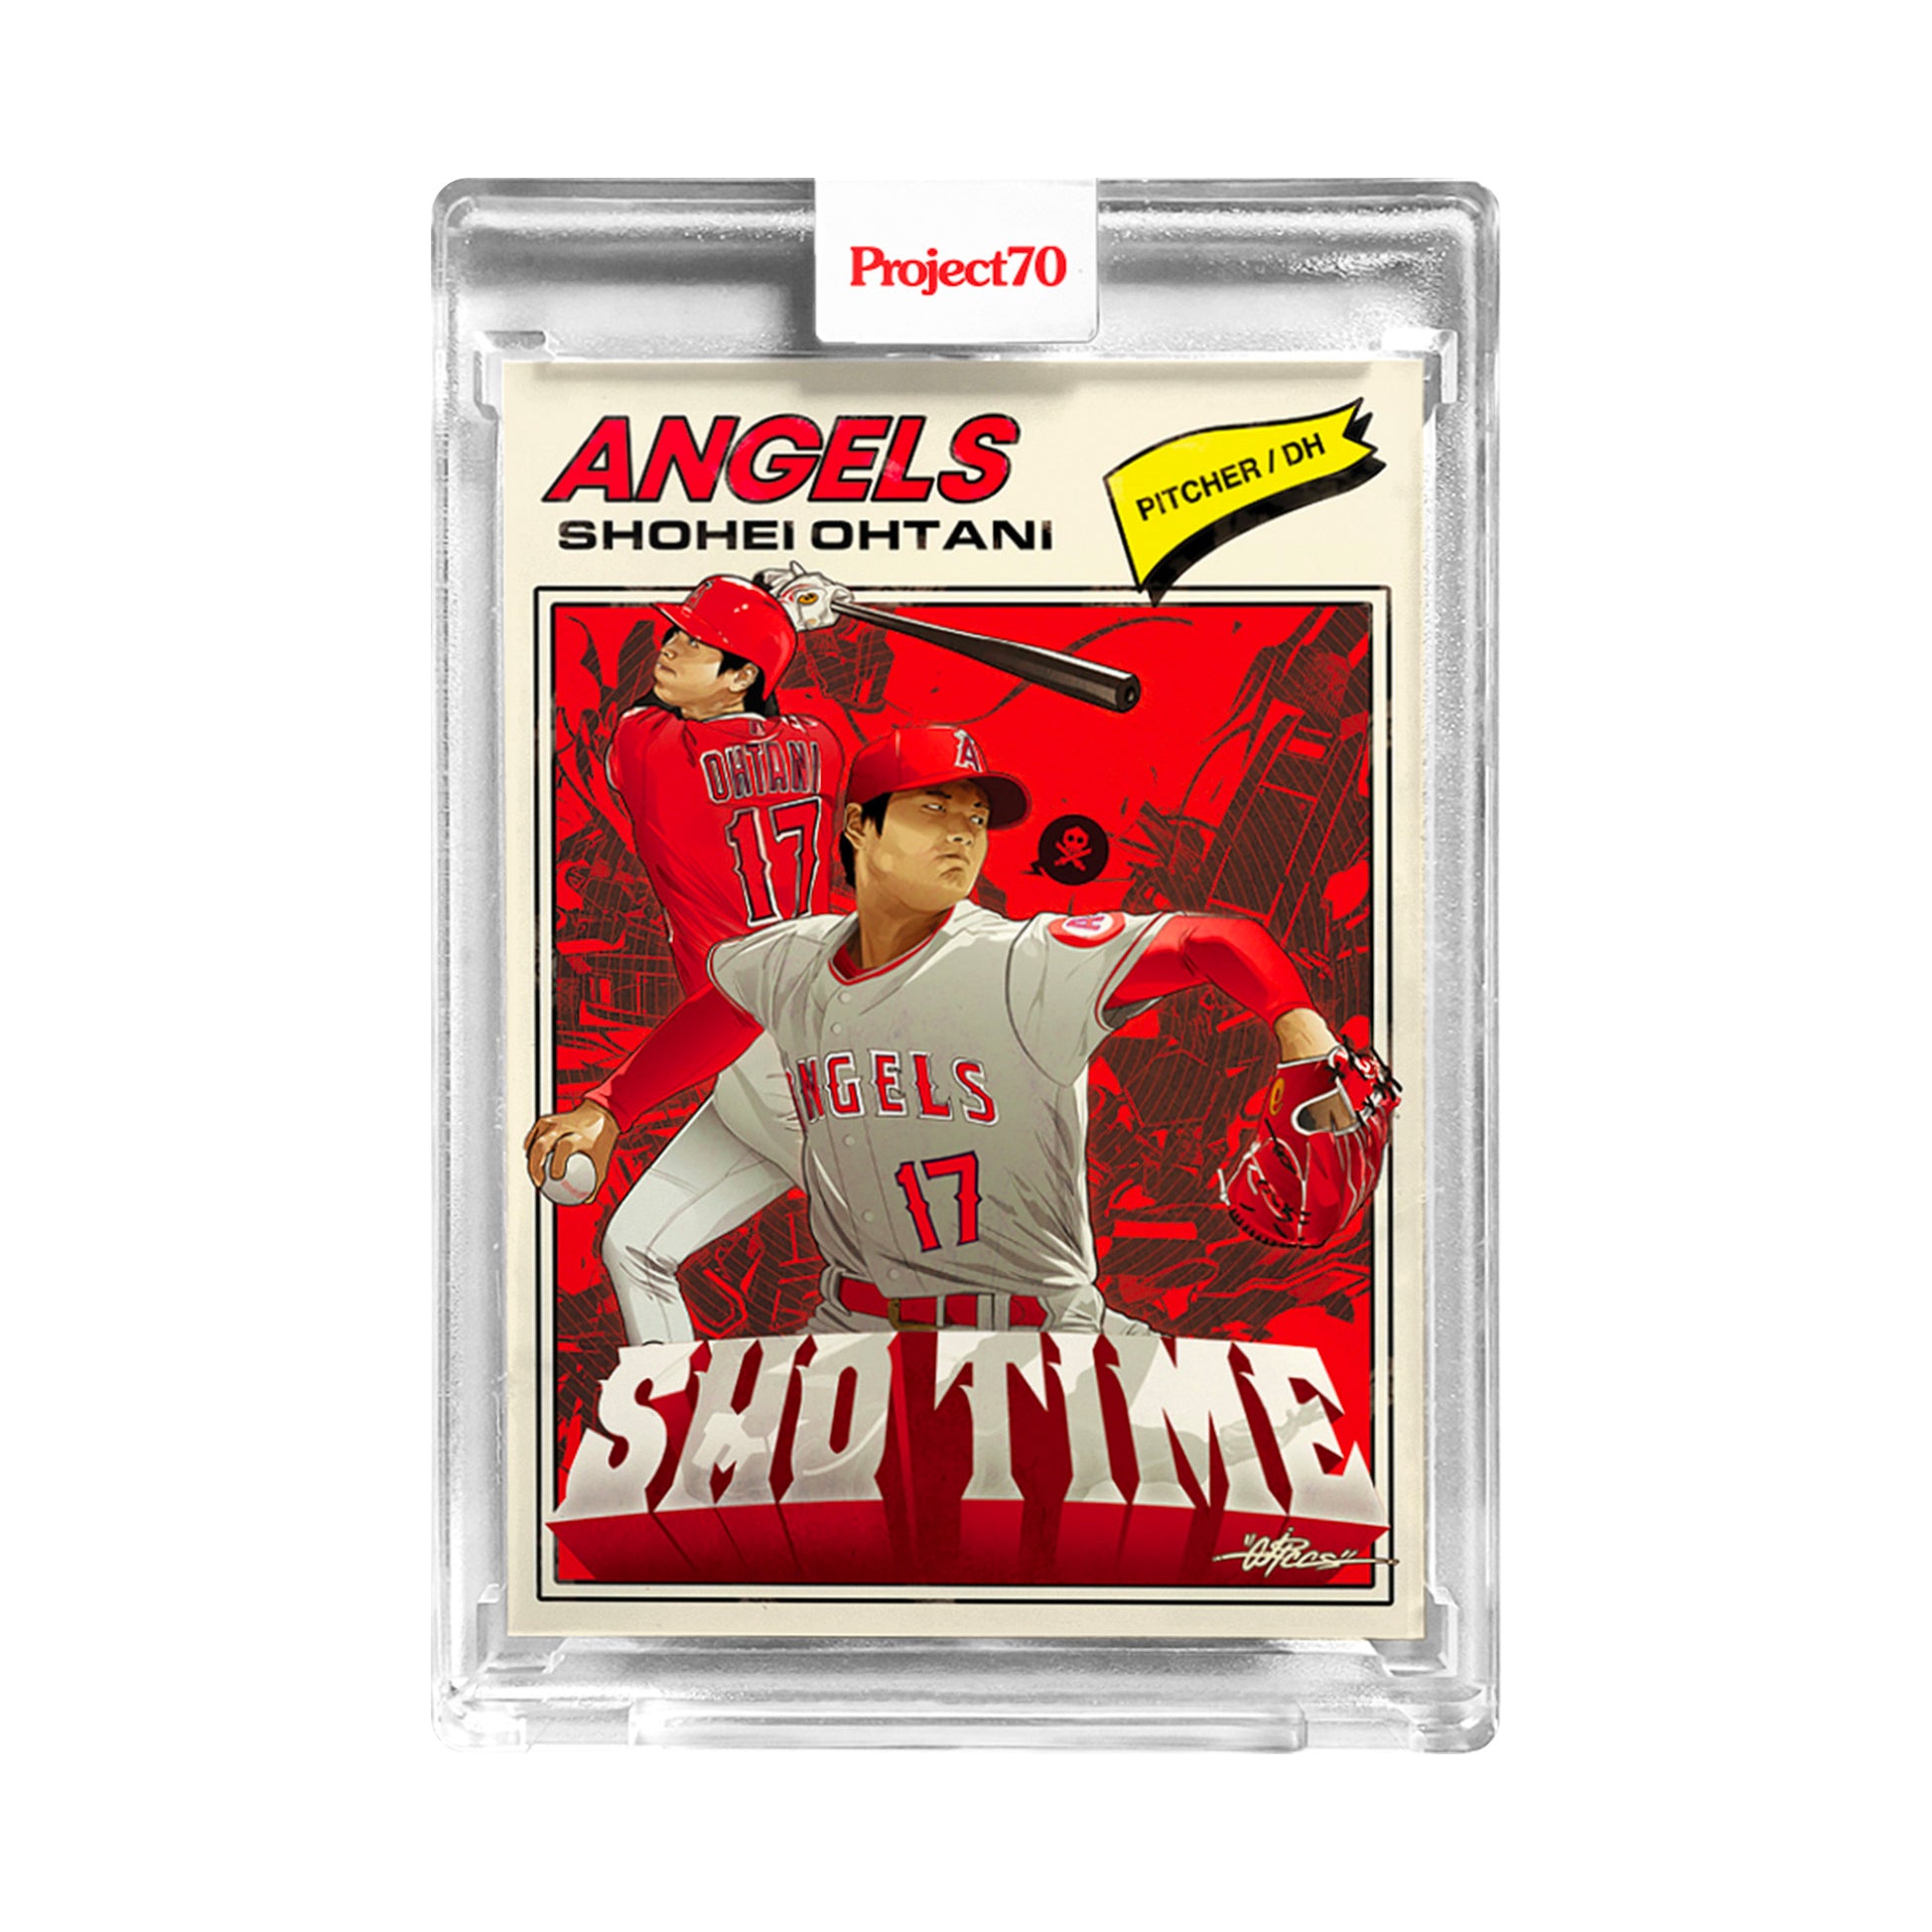 Topps Project70® Card 139 - 1977 Shohei Ohtani Signed by Quiccs – TOY TOKYO